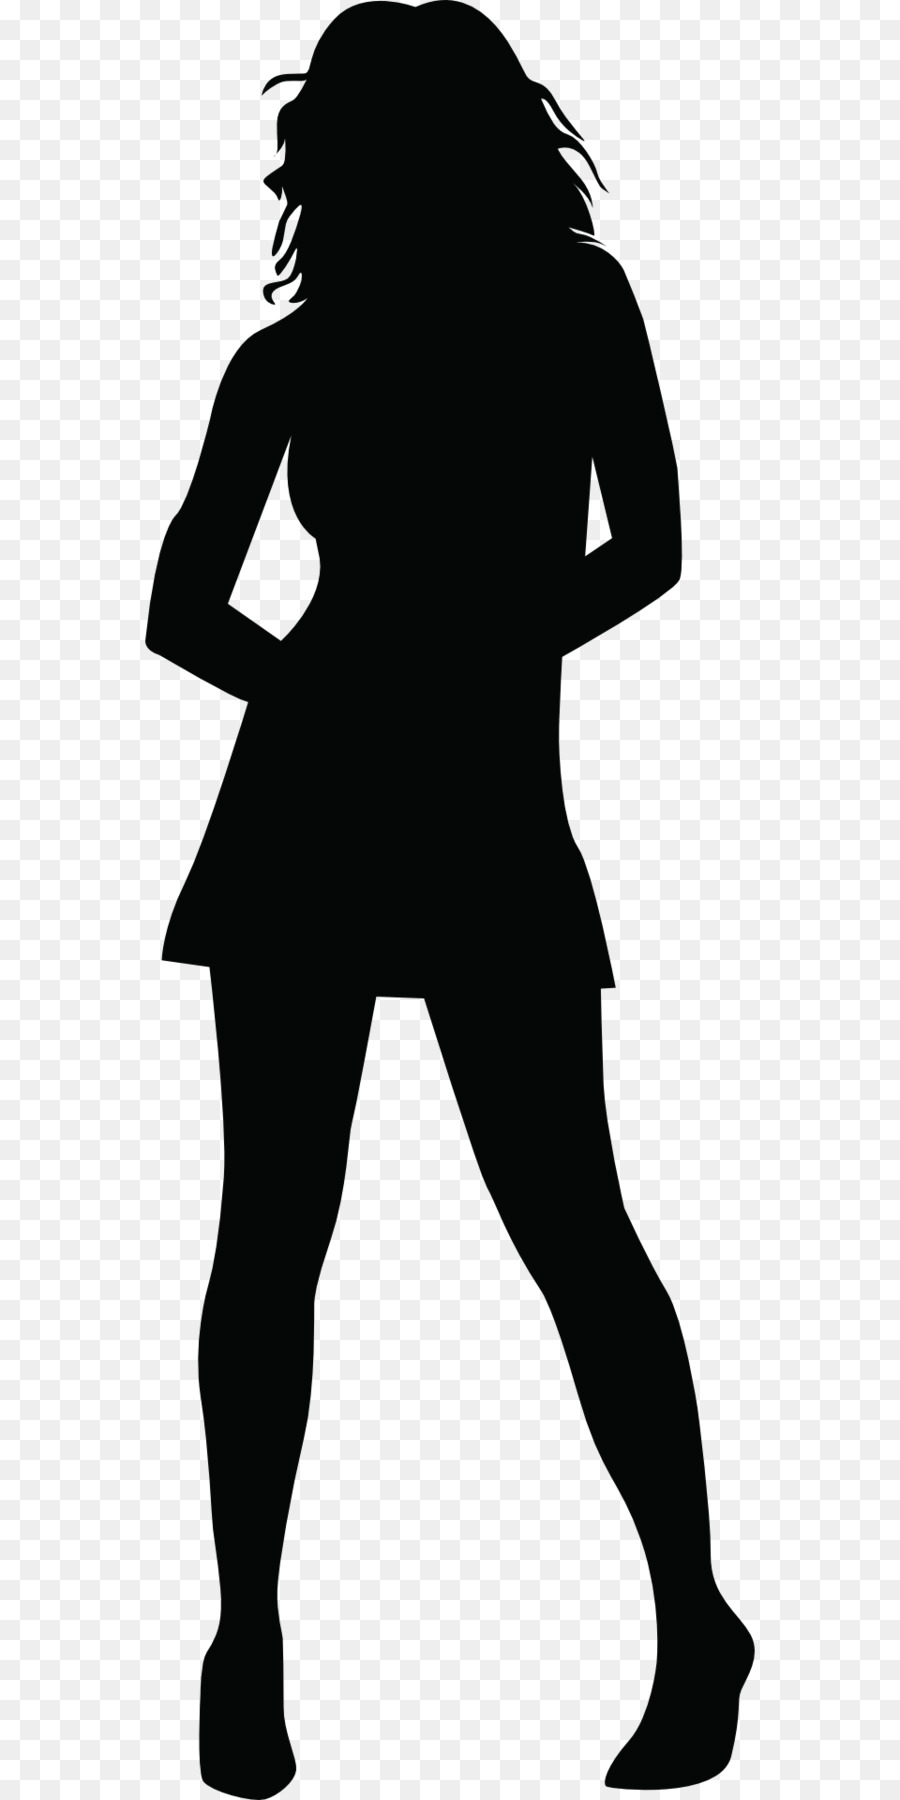 Silhouette Woman Clip art - woman silhouette png download - 960*1920